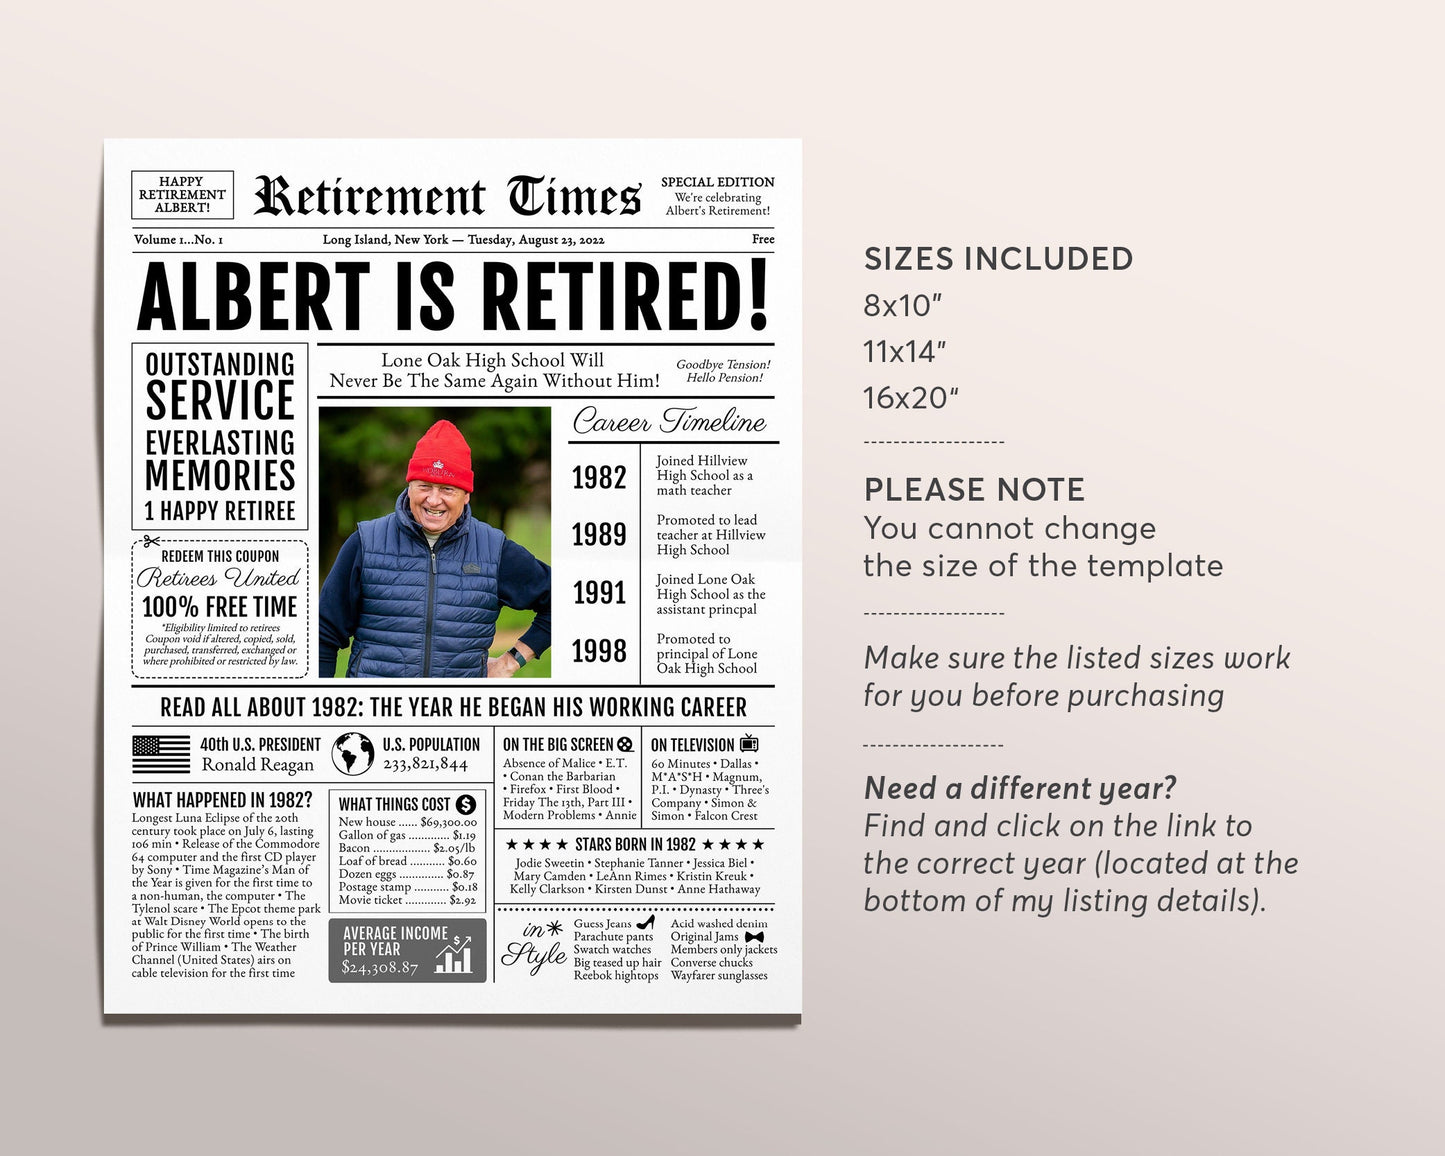 Personalized Retirement Gift for Men or Women, Editable Retirement Celebration Welcome Sign, Unique Party Decoration, Newspaper Back in 1982